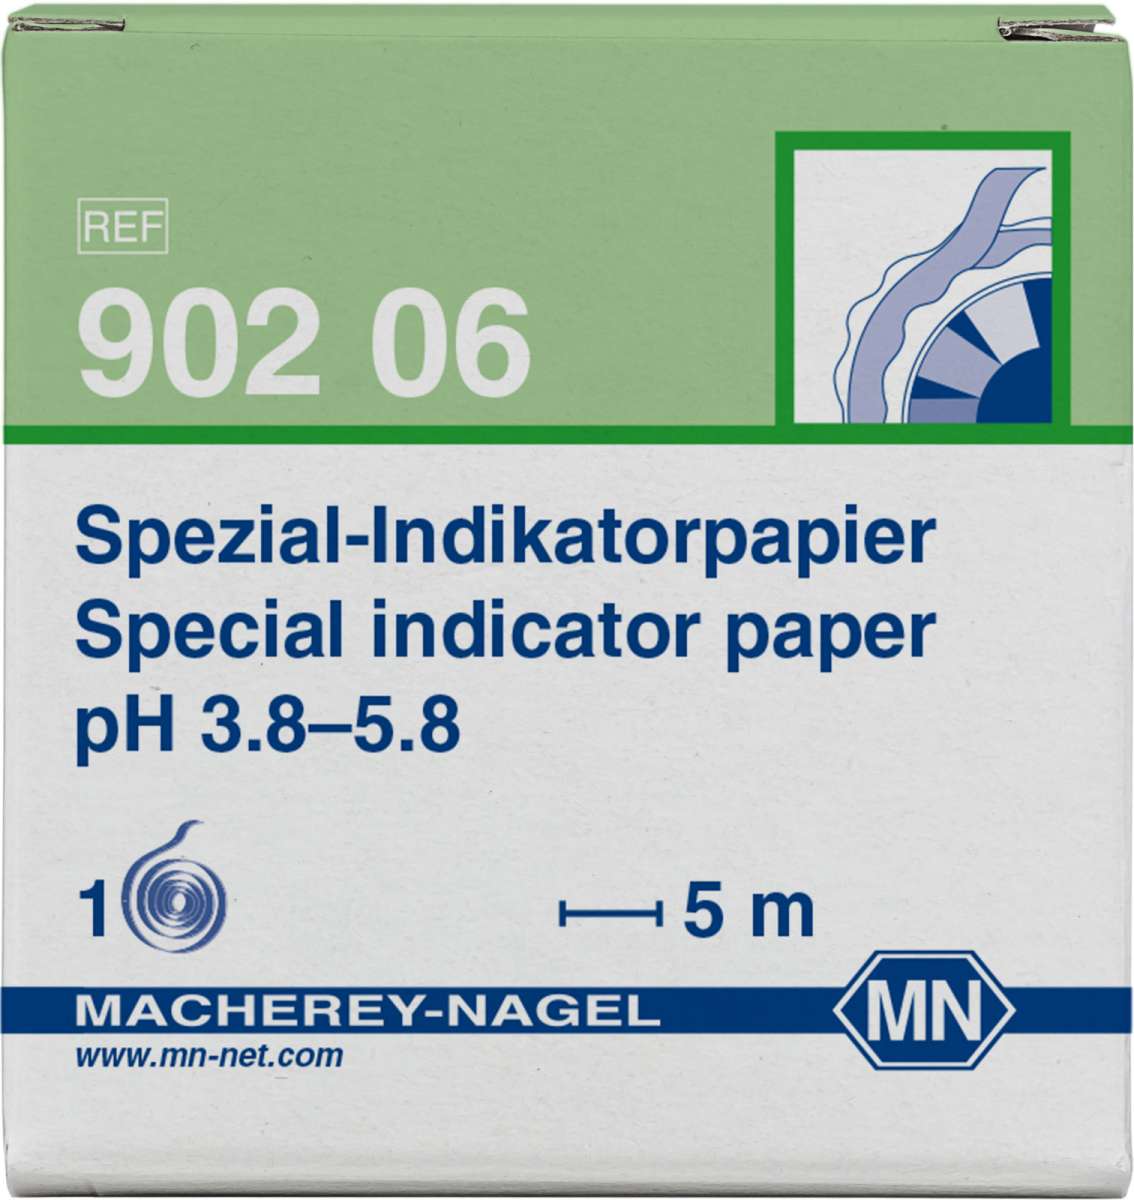 Refill pack for Special indicator paper pH 3.8 to 5.8 (3 reels of 5m length and 7mm width)